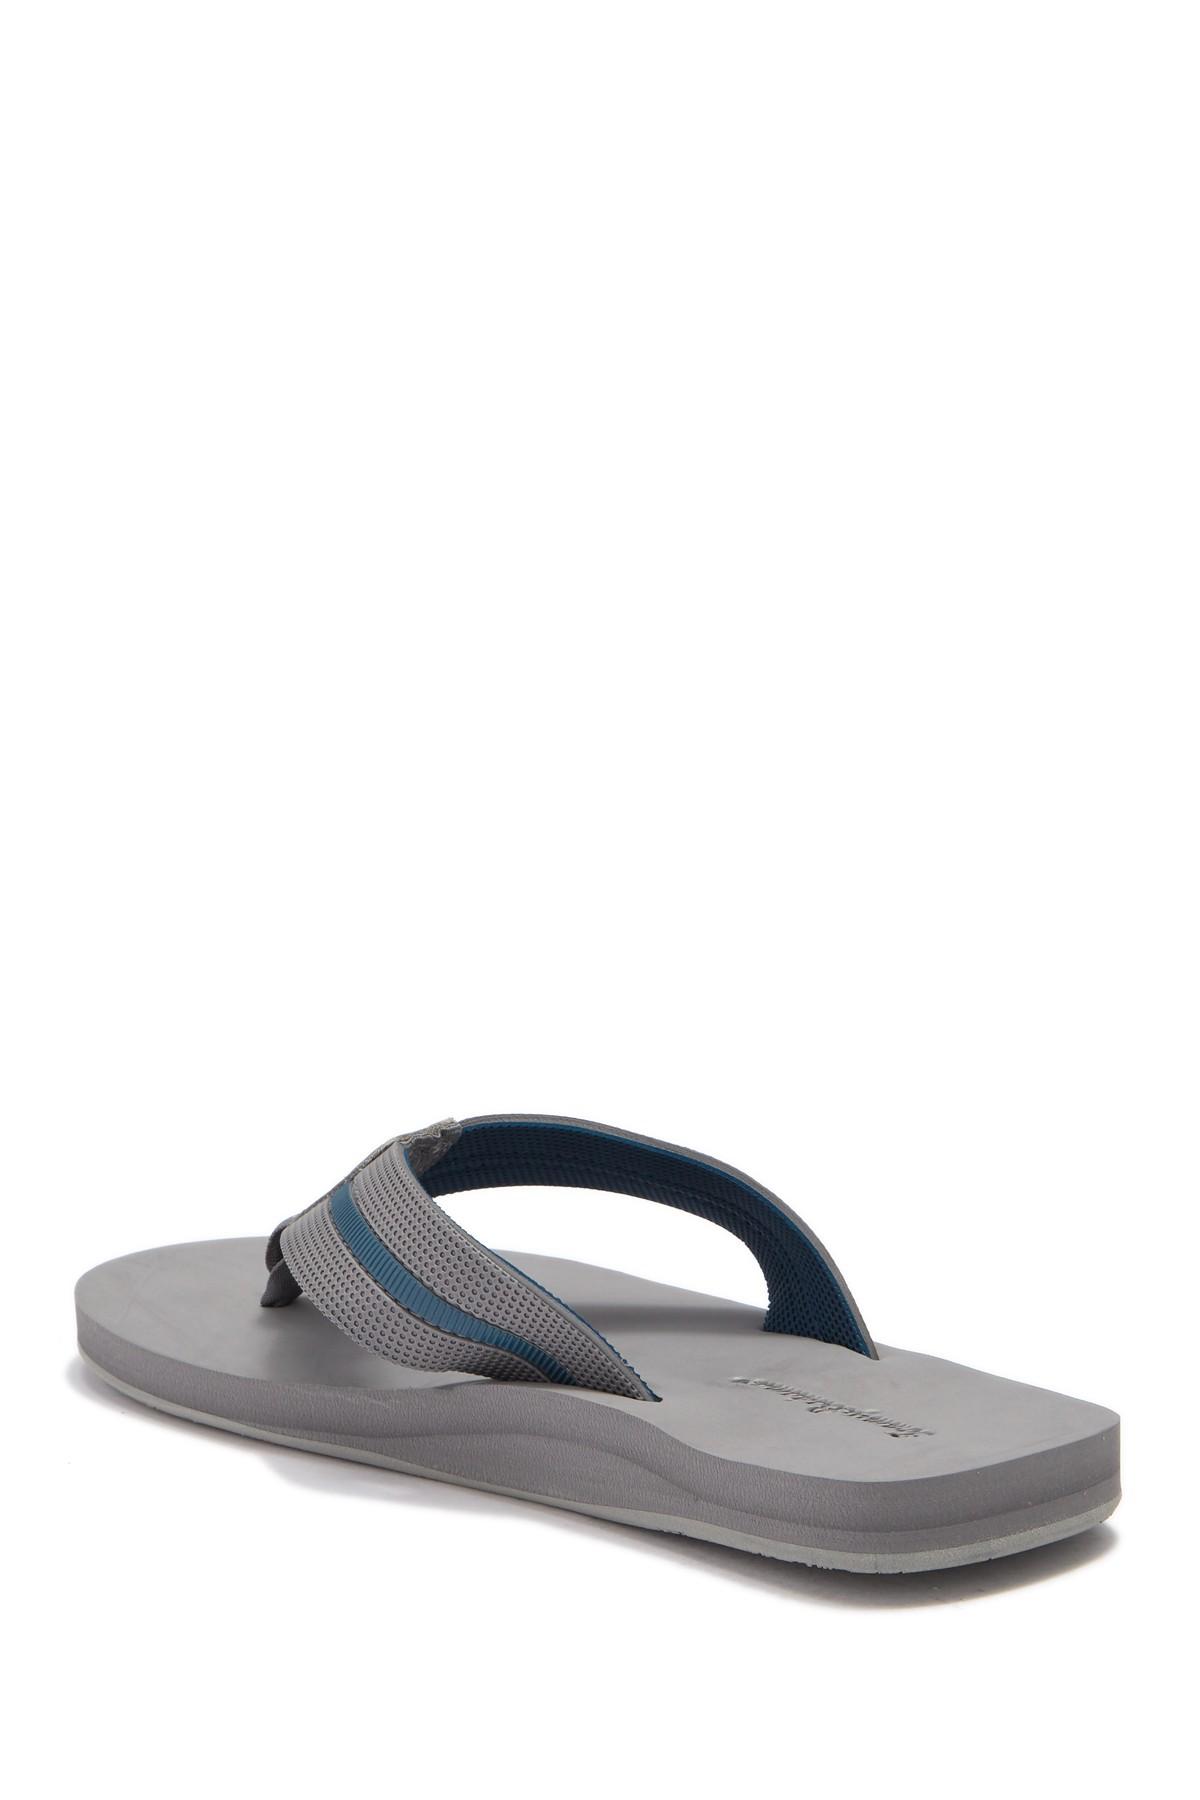 Tommy Bahama Fiji Flip Flop in Gray for 